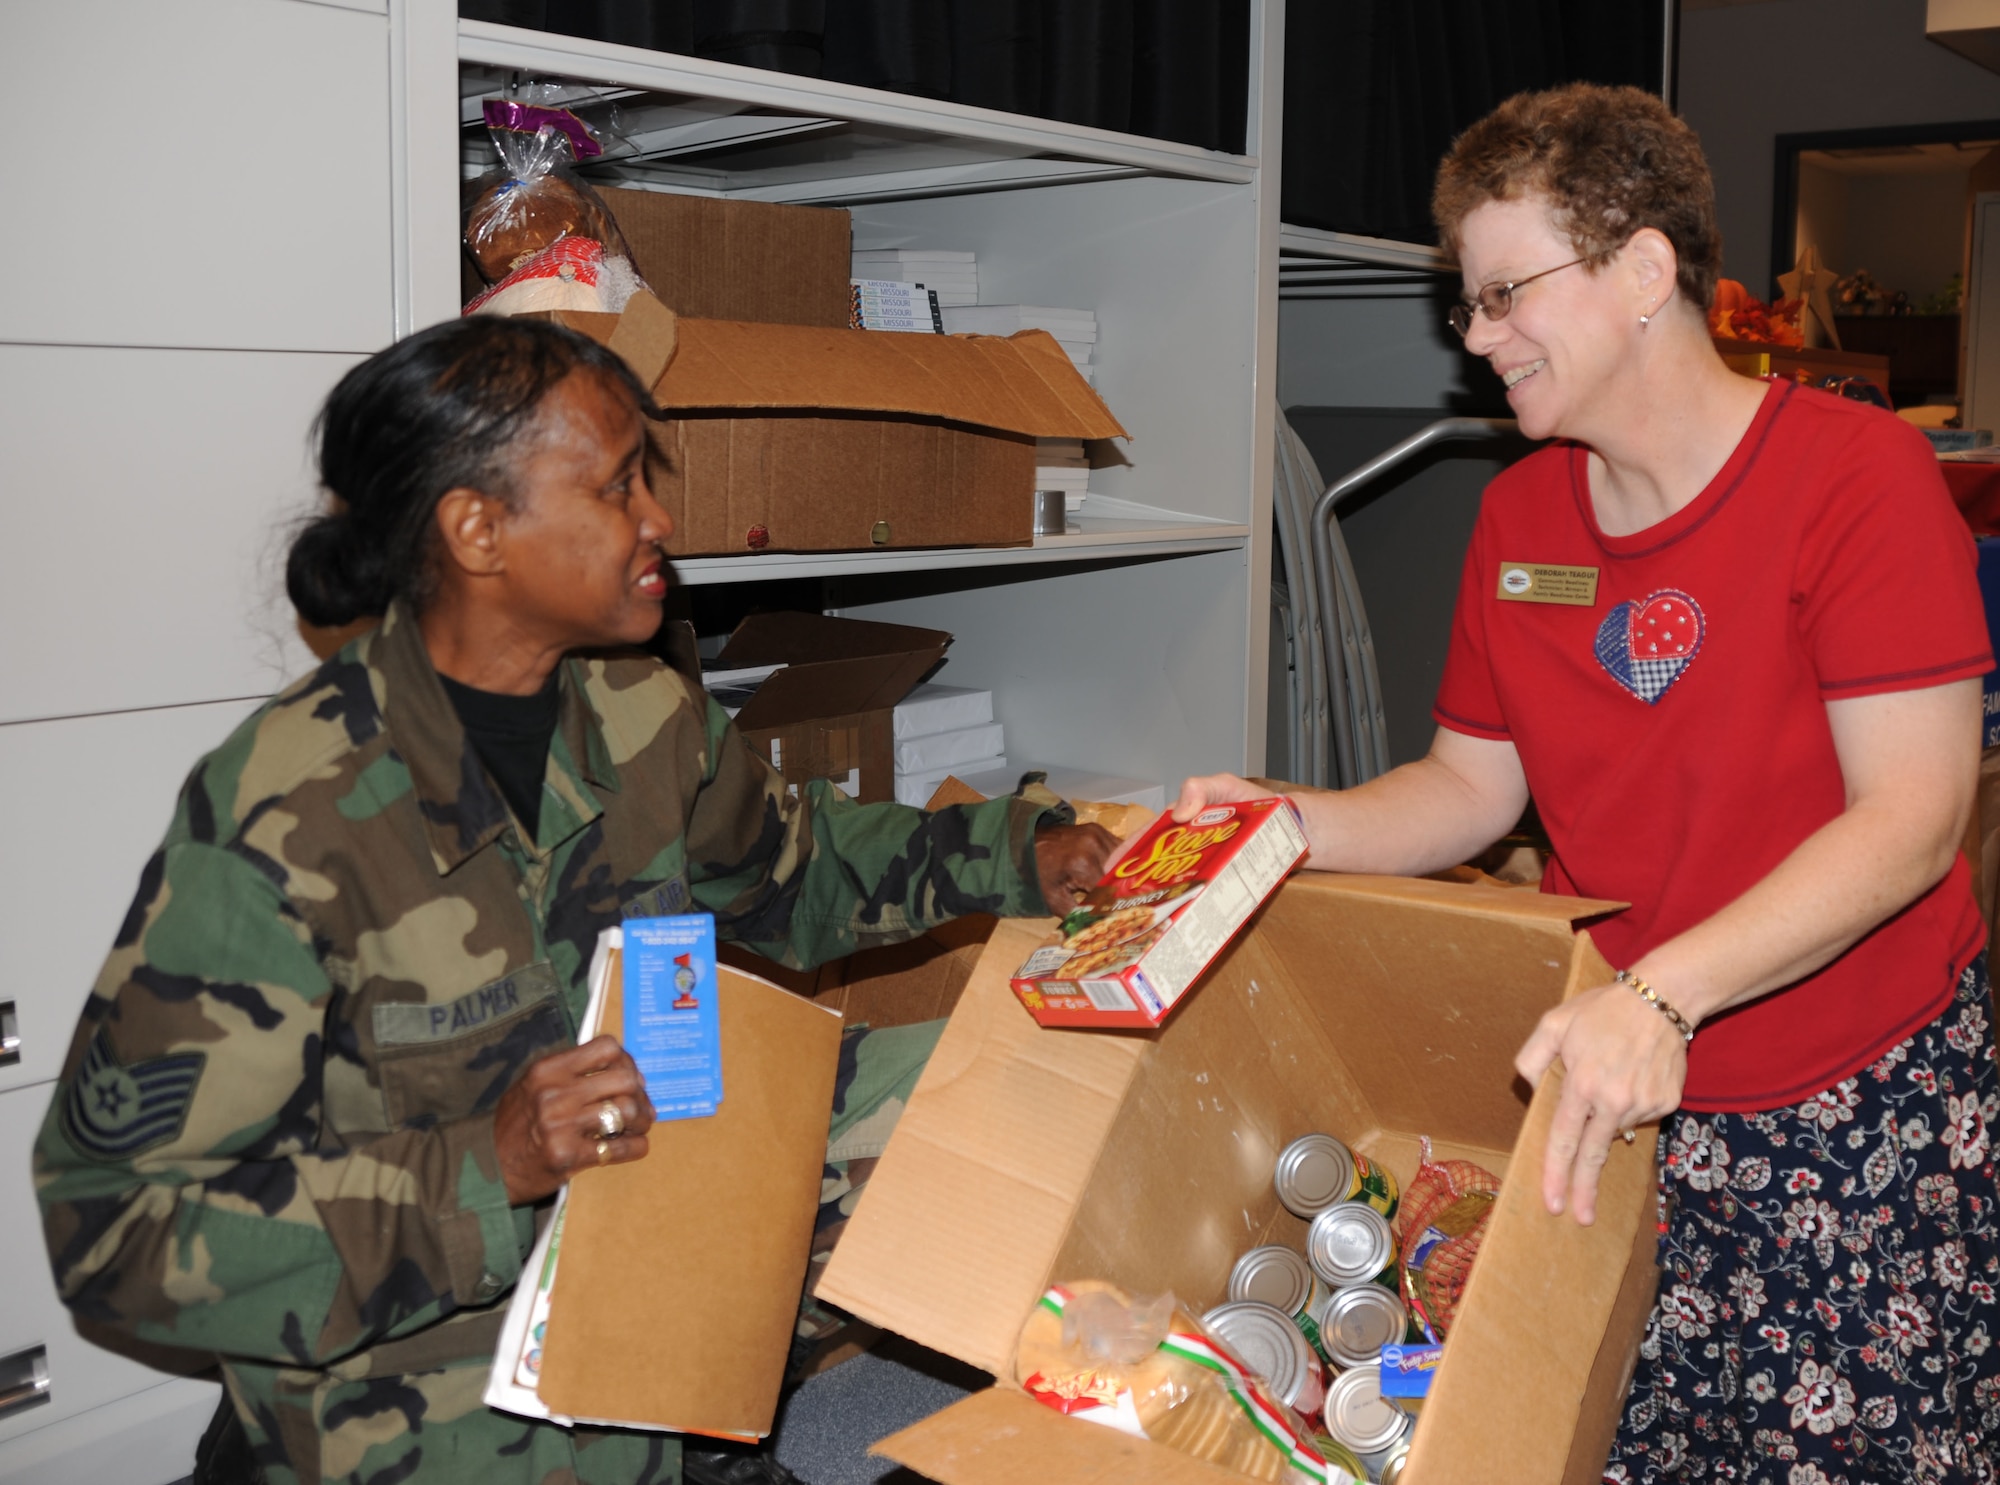 932nd Airlift Wing, Air Force Reserve member Tech. Sgt. Adriane Palmer, brings more food to Deborah Teague in the family readiness office to help with Thanksgiving. She and others are helping to create baskets of food for fellow military members. Donations of food and money have helped the wing to take care of members who might need a little assistance this year during the holidays.  You can get involved by talking to them on the next drill weekend. (U.S. Air Force/Maj. Stan Paregien) 